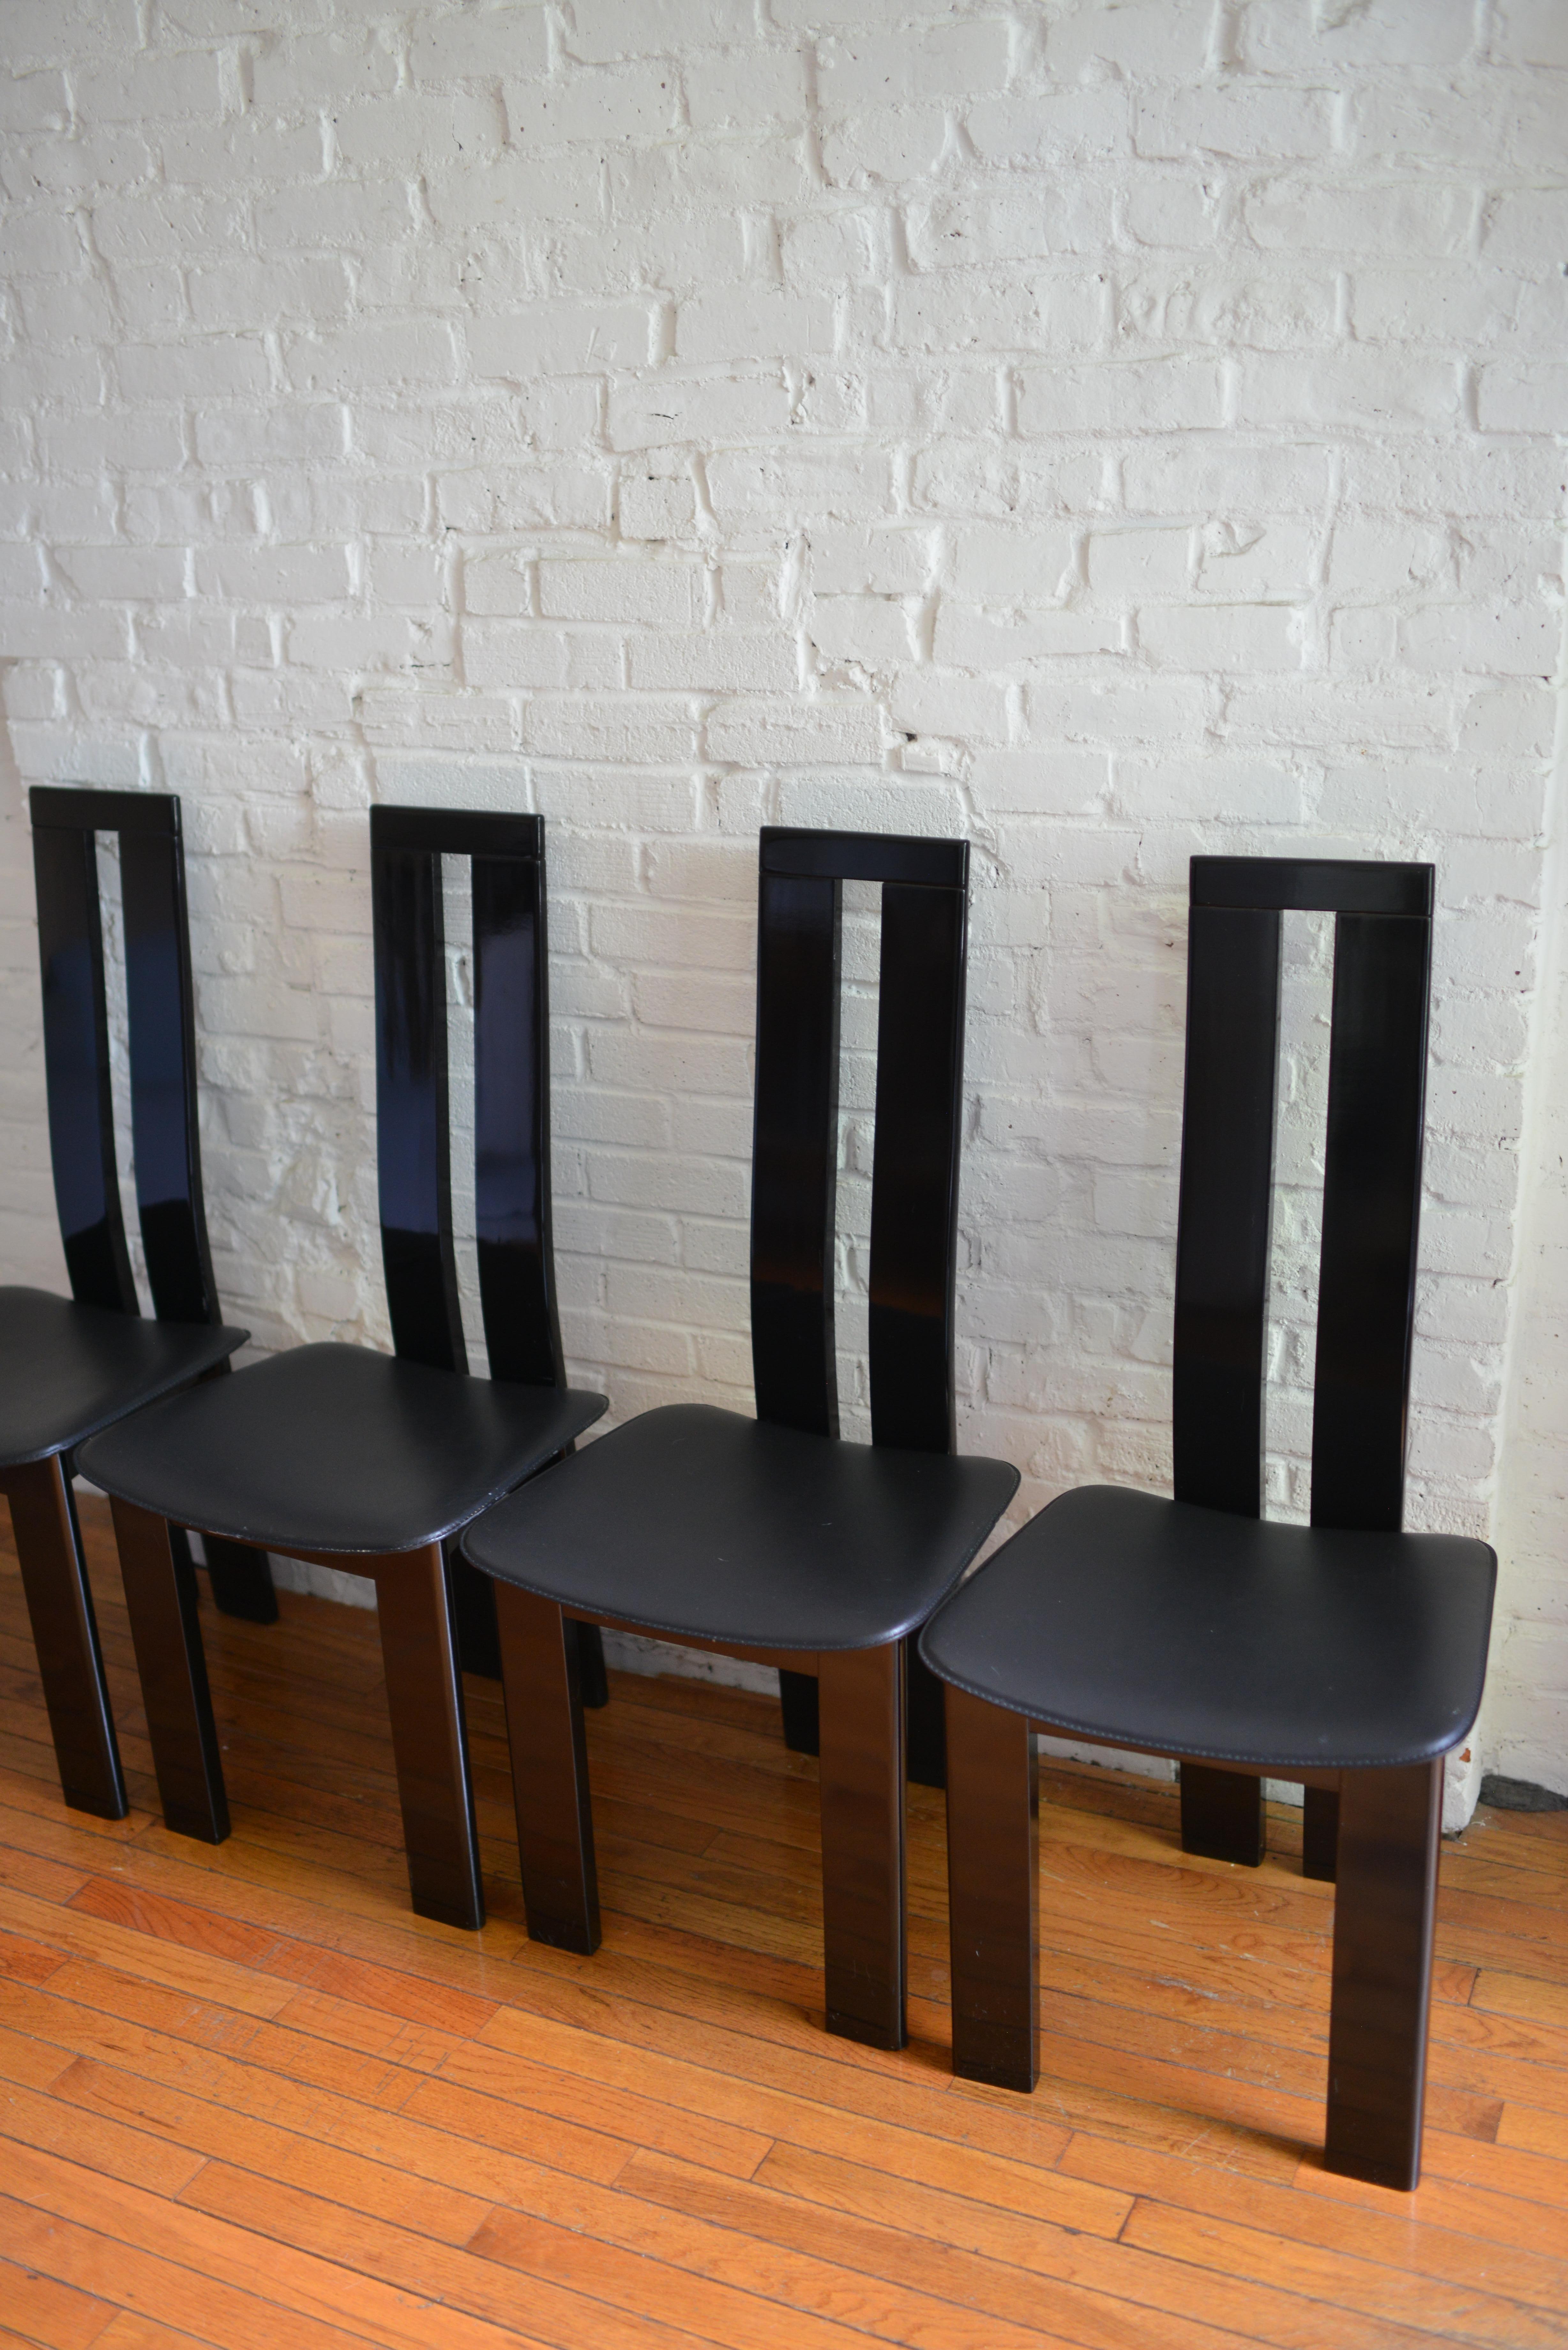 Lacquered Set of 4 Pietro Costantini Post Modern Dining Chairs, Made in Italy, 1970s For Sale